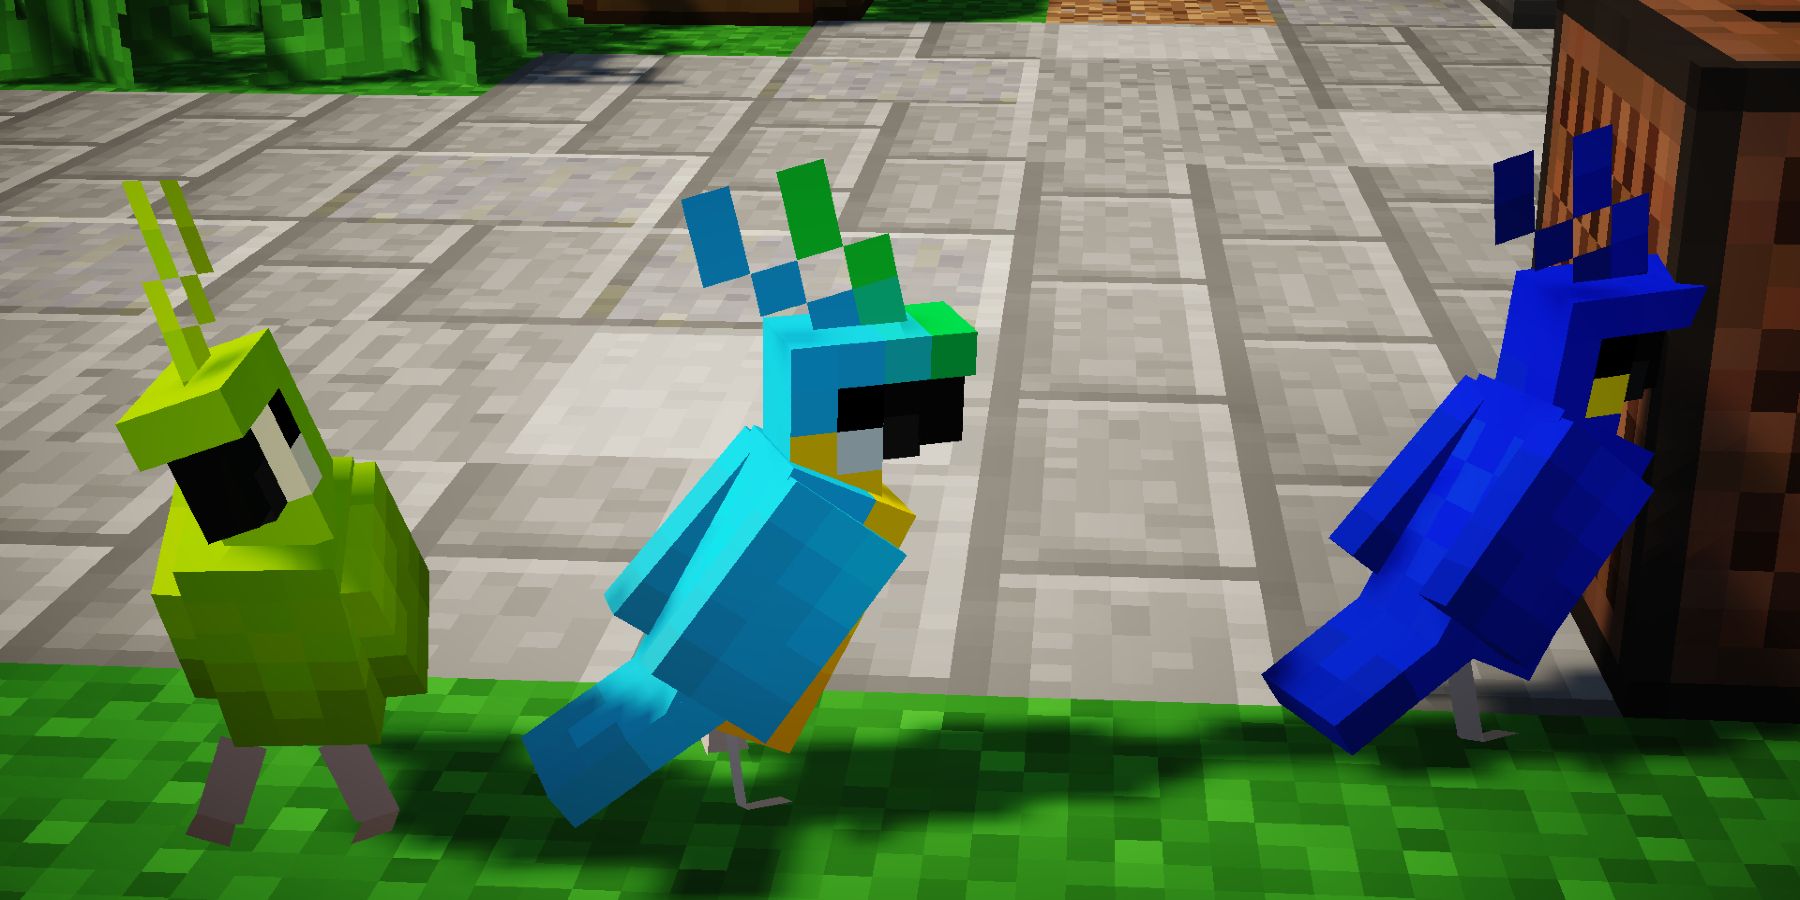 3 color variations of parrots from Minecraft next to a jukebox